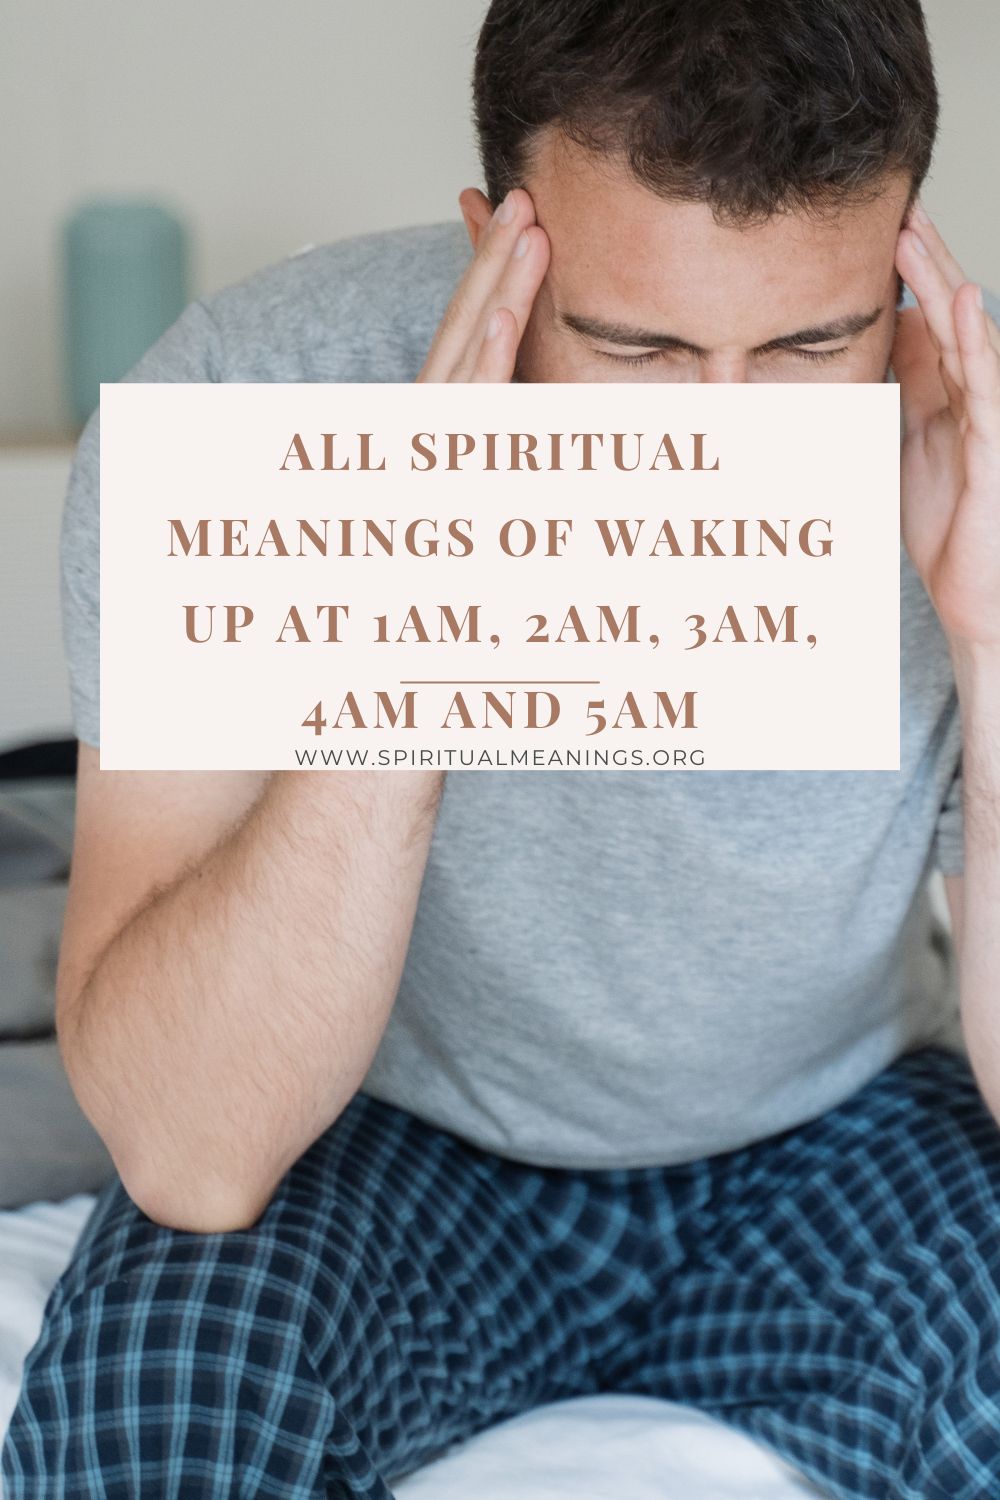 All Spiritual Meanings of Waking Up at 1am, 2am, 3am, 4am and 5am pin